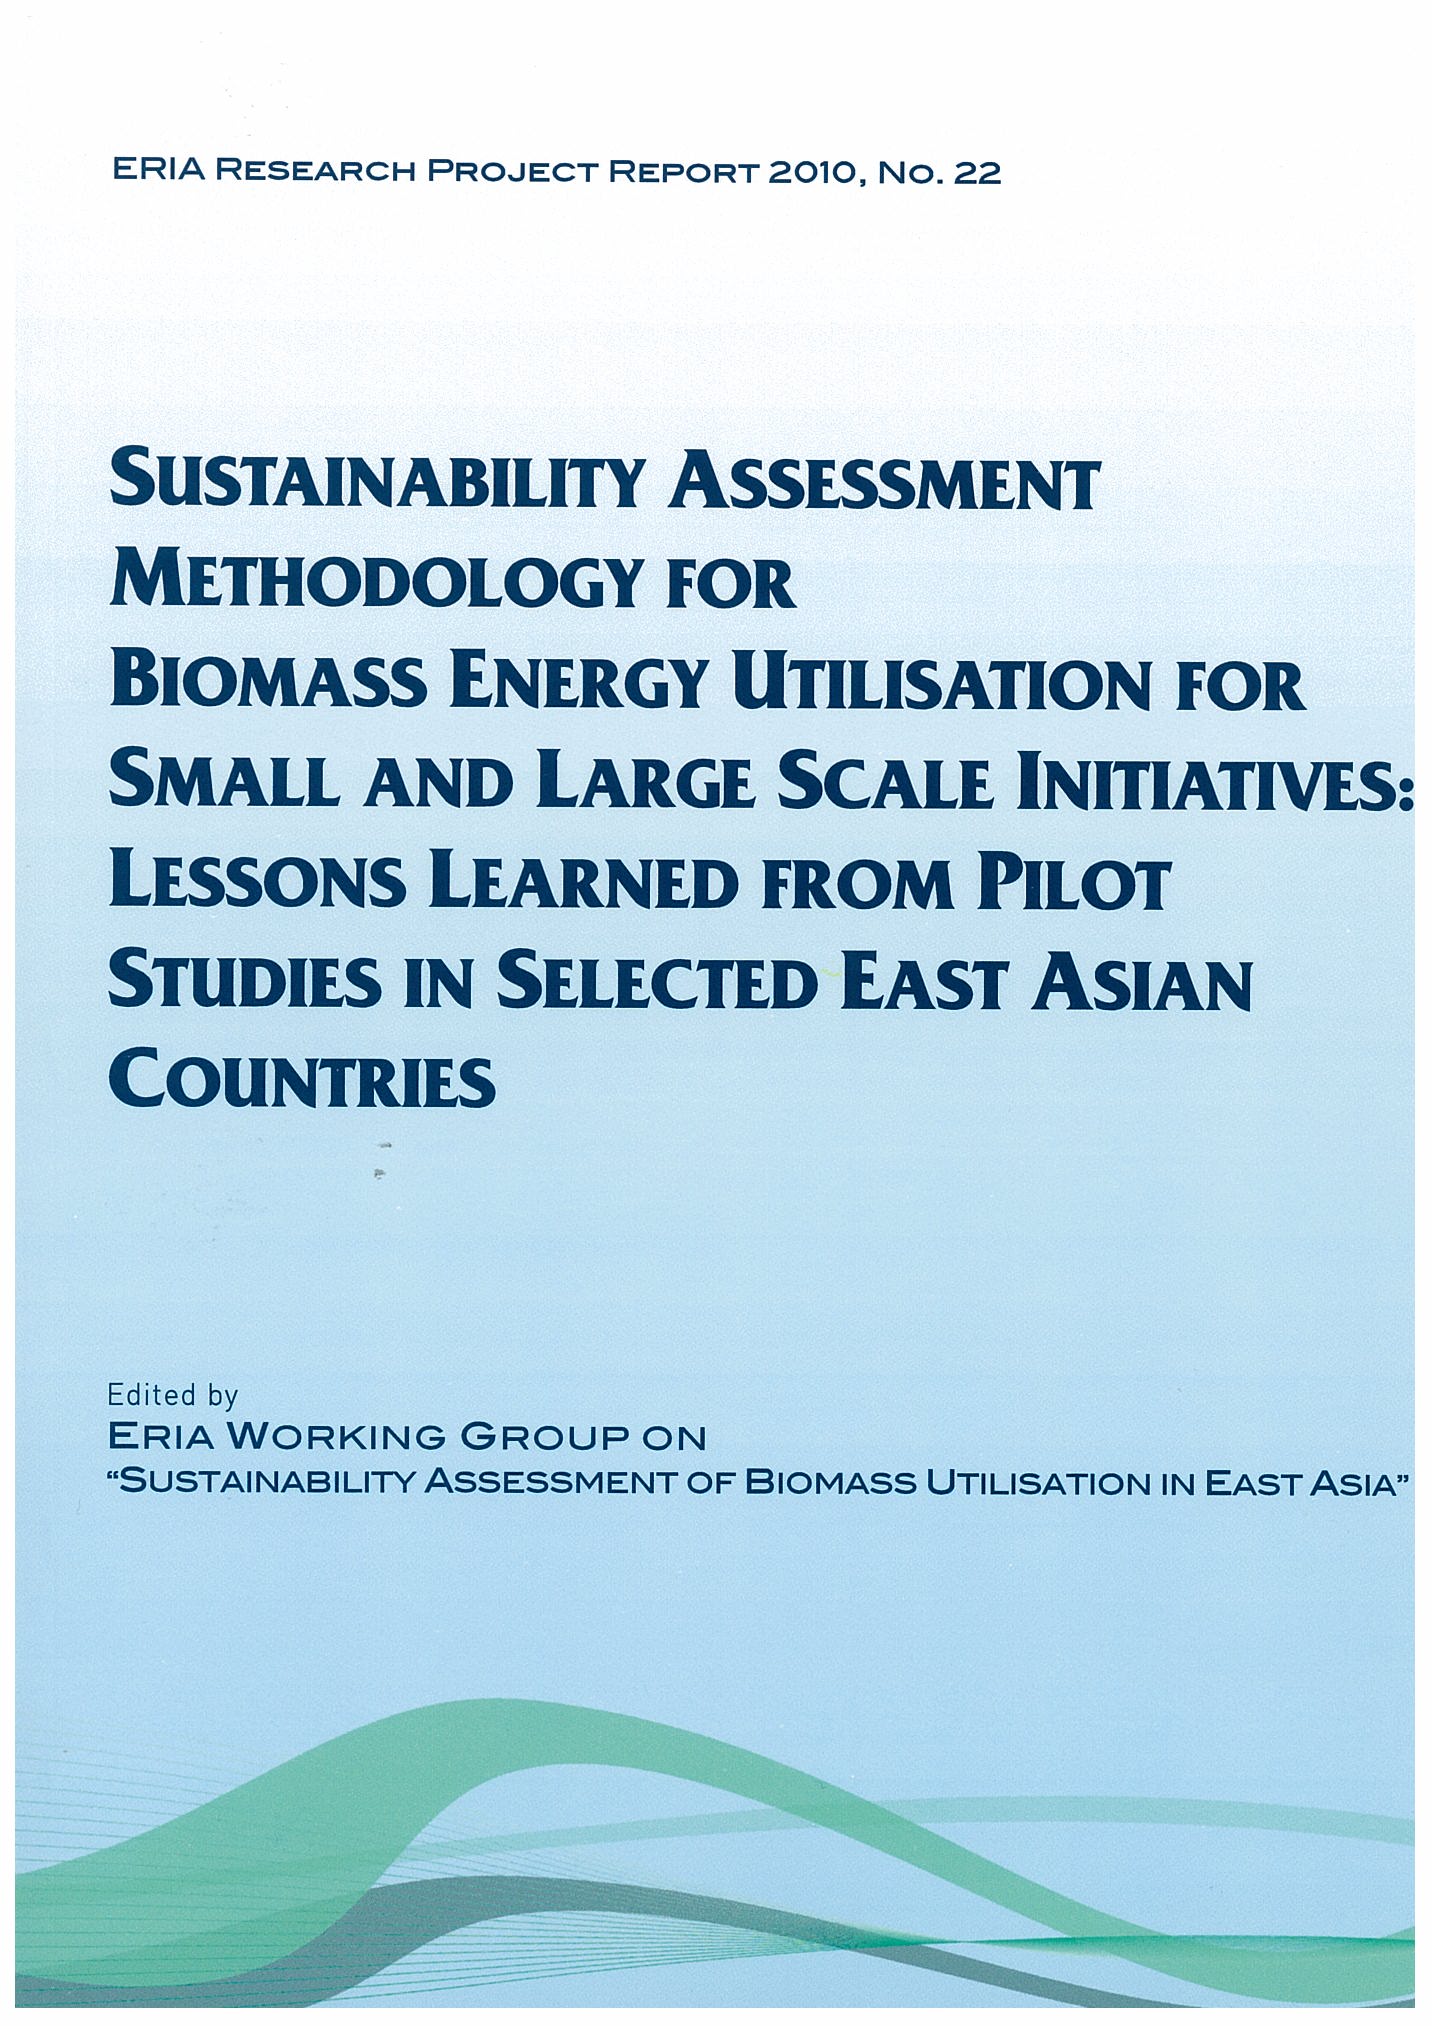 Sustainability Assessment methodology for Biomass Energy Utilization for Small and Large Scale Initiatives: Lessons Learned from Pilot Studies in Selected East Asian Countries